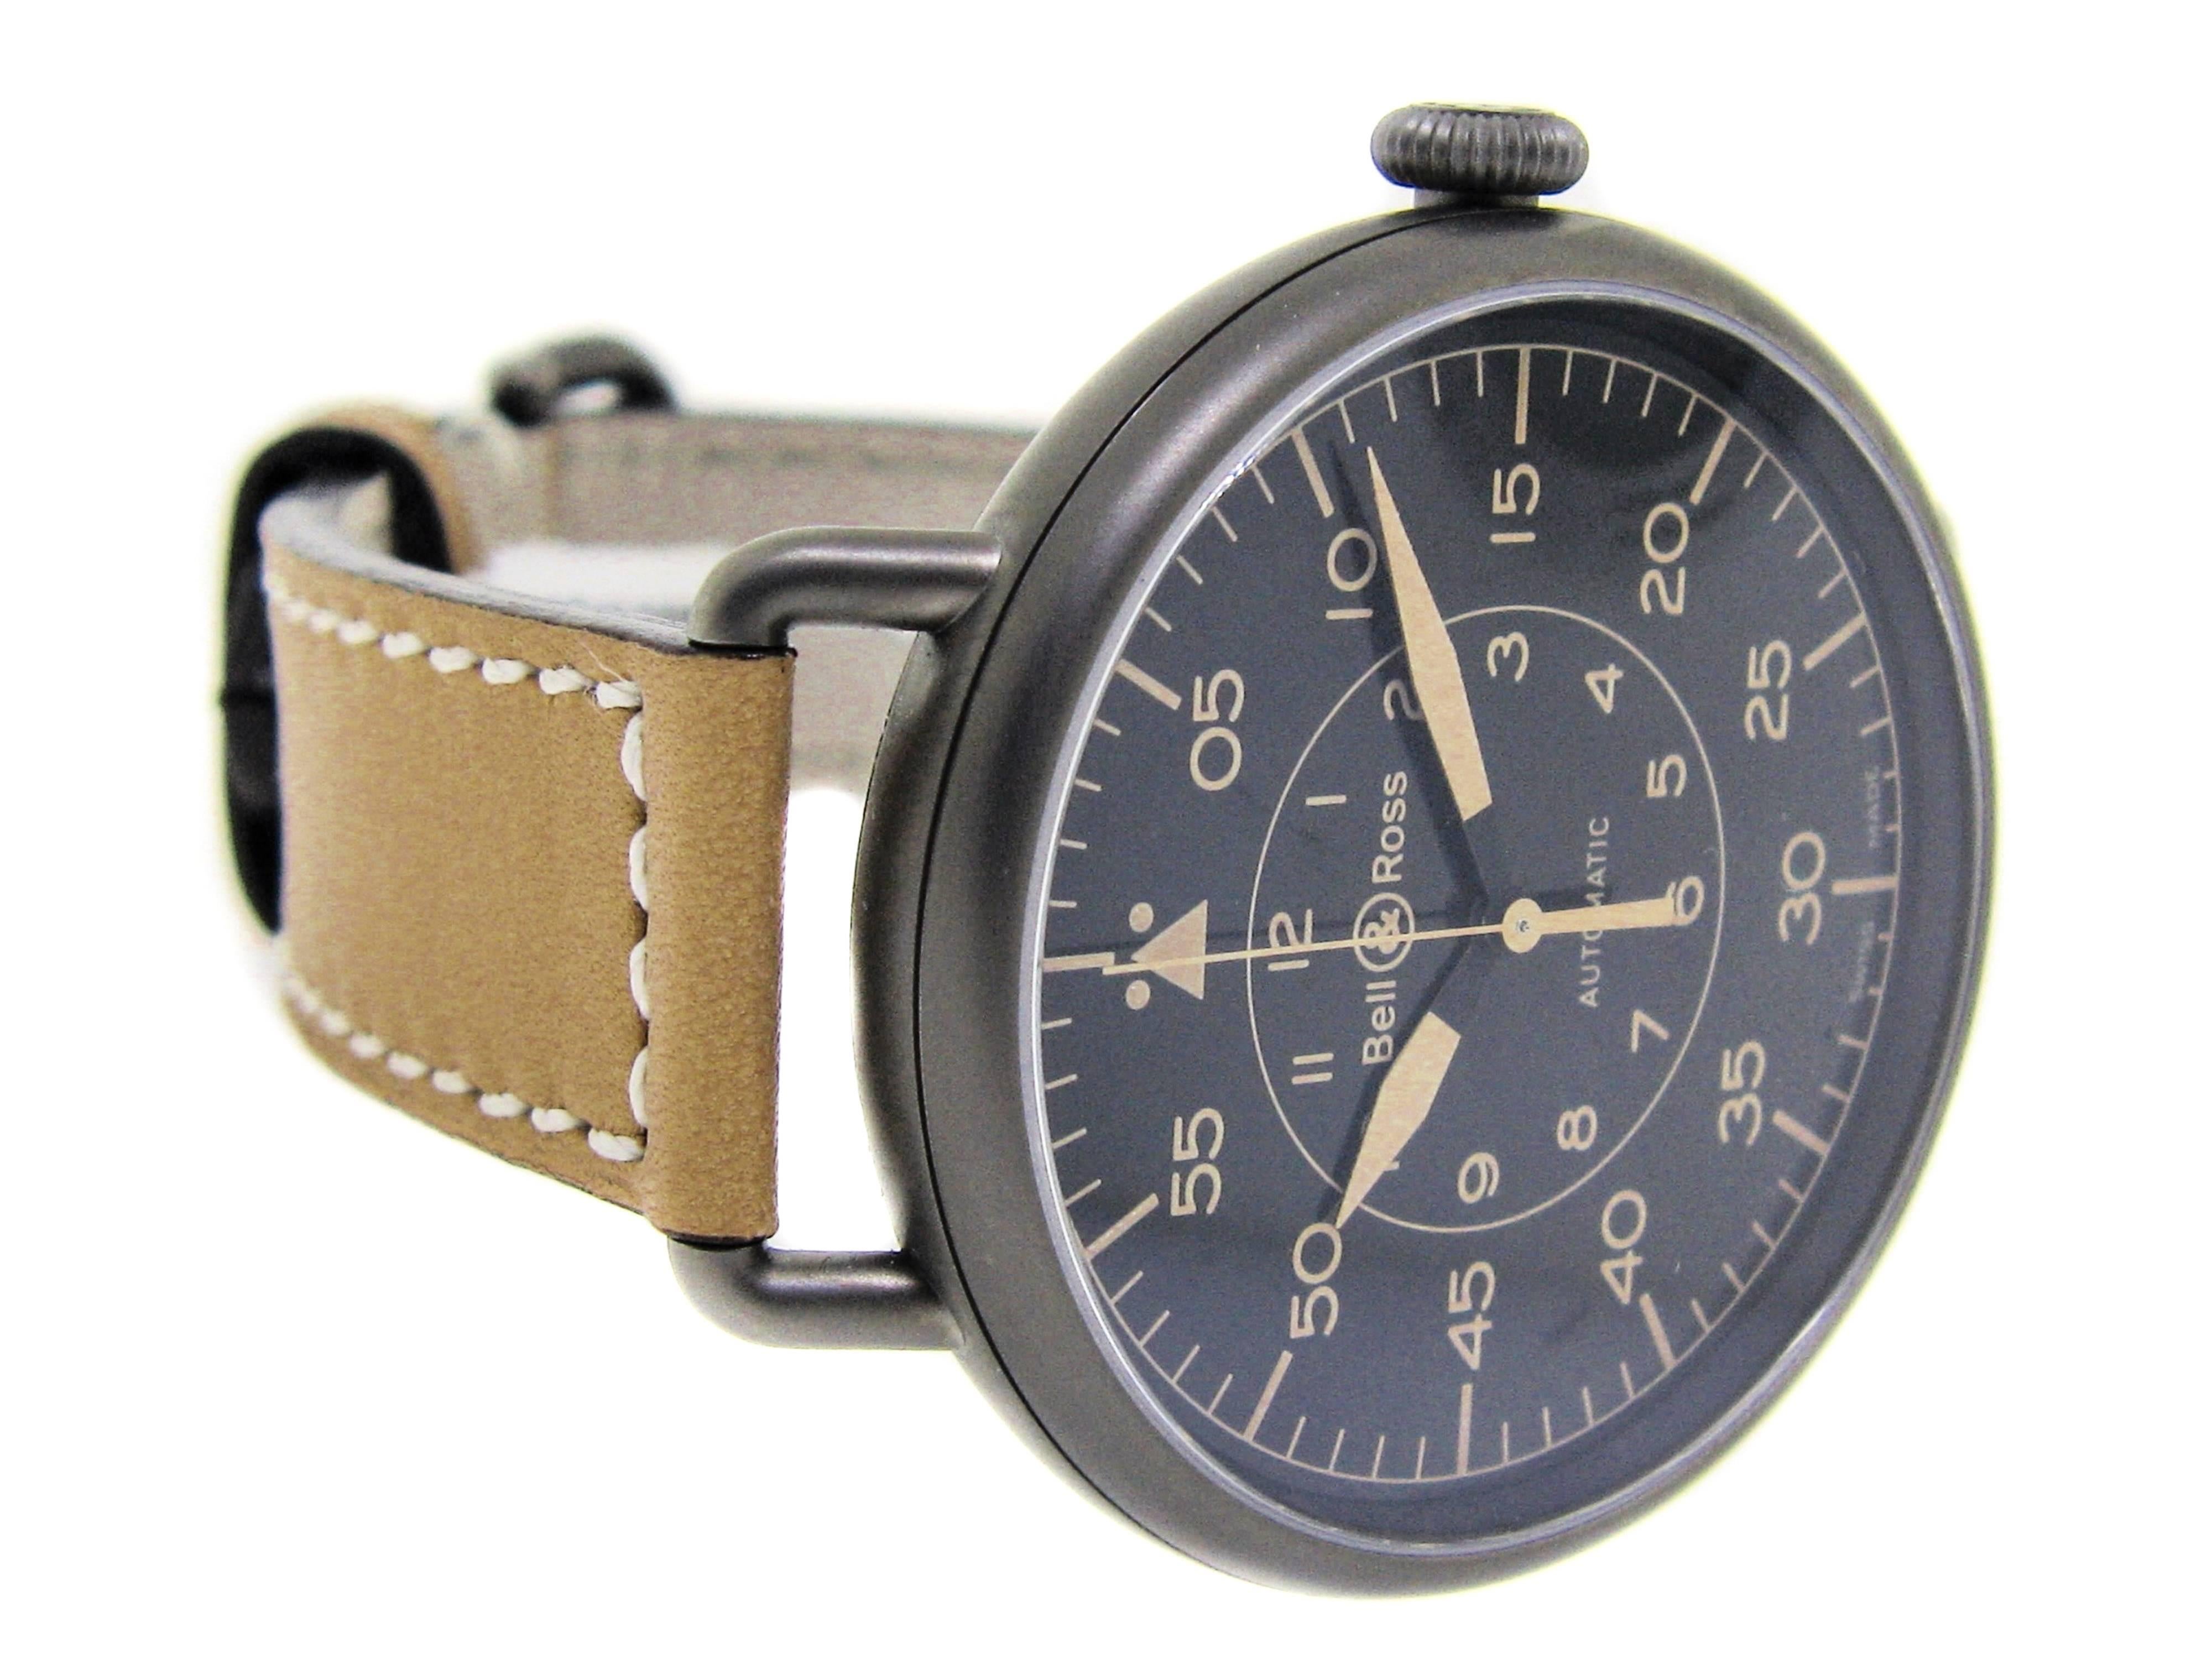 The Vintage WW1 (Wrist Watch 1) pays tribute to the first wristwatches worn by pilots in the 1920s. 
It features distinctive large fob-watch type diameter, wire lugs welded to the sides of the watch and a thin elegant yet strong leather strap.
This